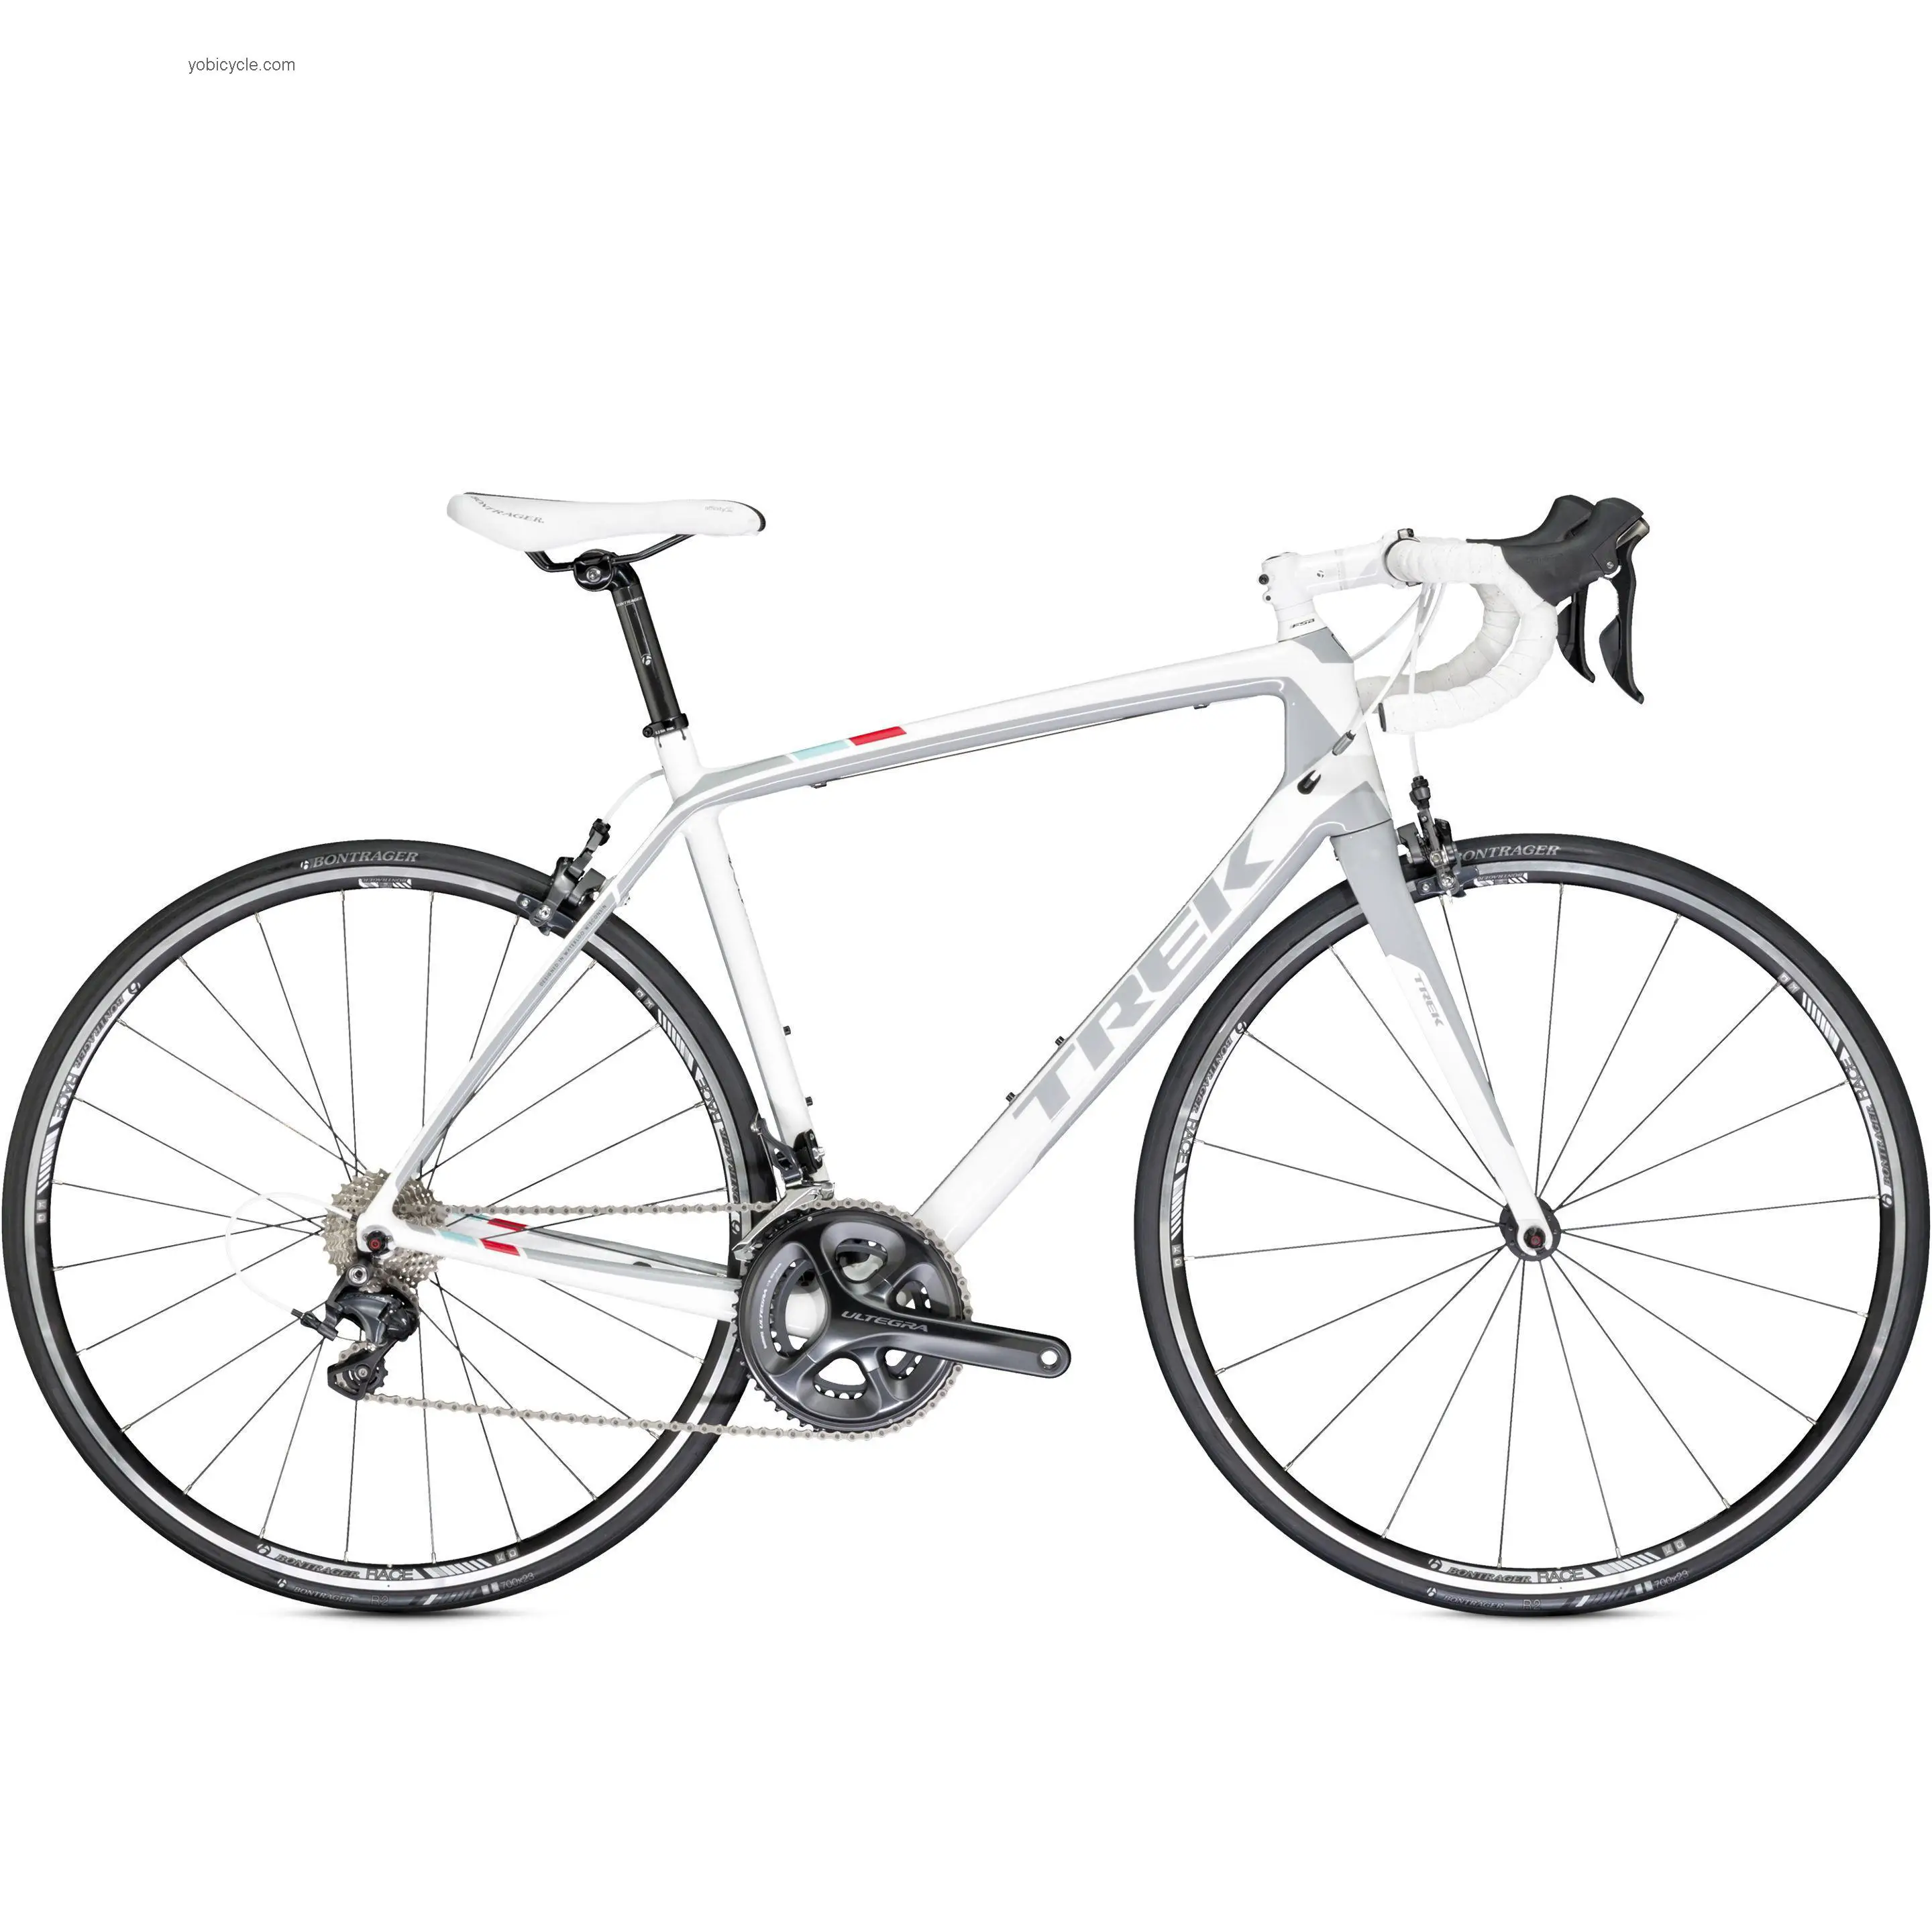 Trek Madone 4.7 C H2 competitors and comparison tool online specs and performance